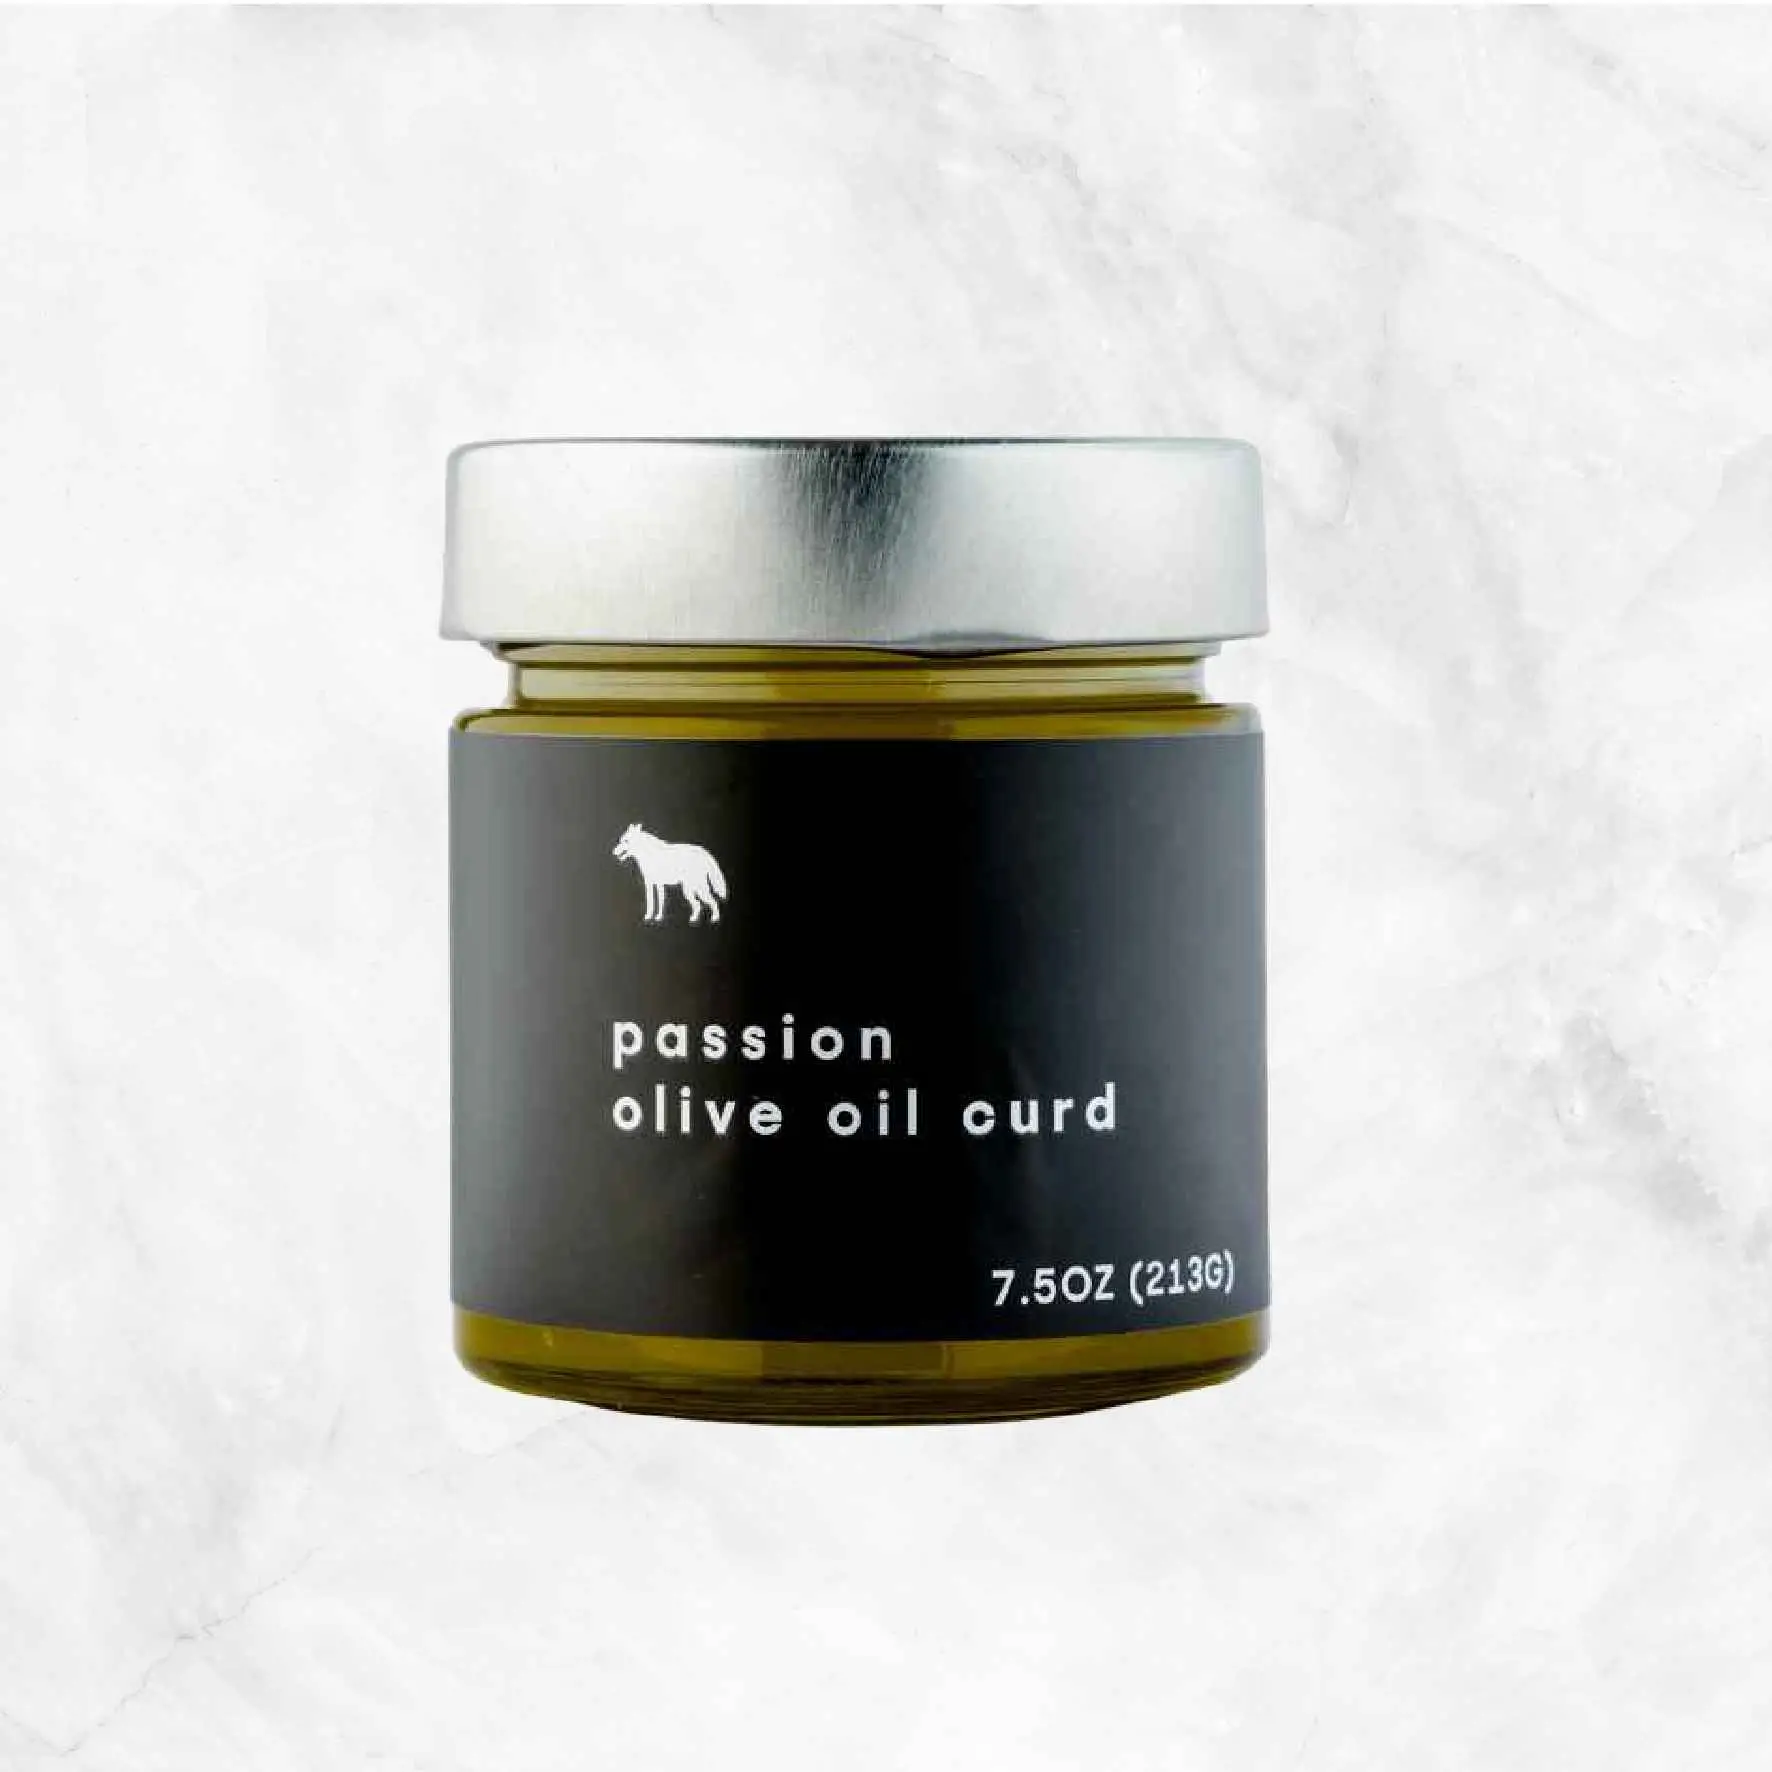 Passion Olive Oil Curd